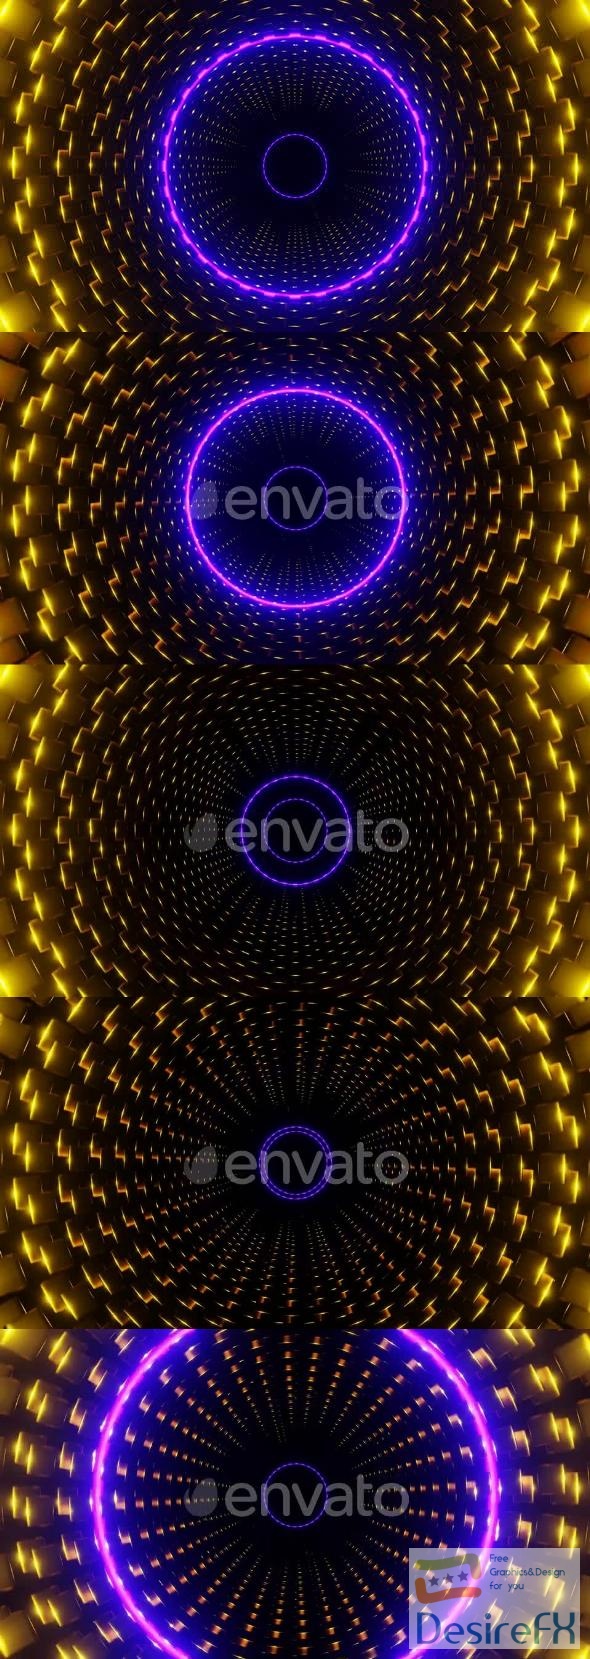 VideoHive Gold With Purple Cylindrical Mechanism Background Vj Loop In HD 47574170